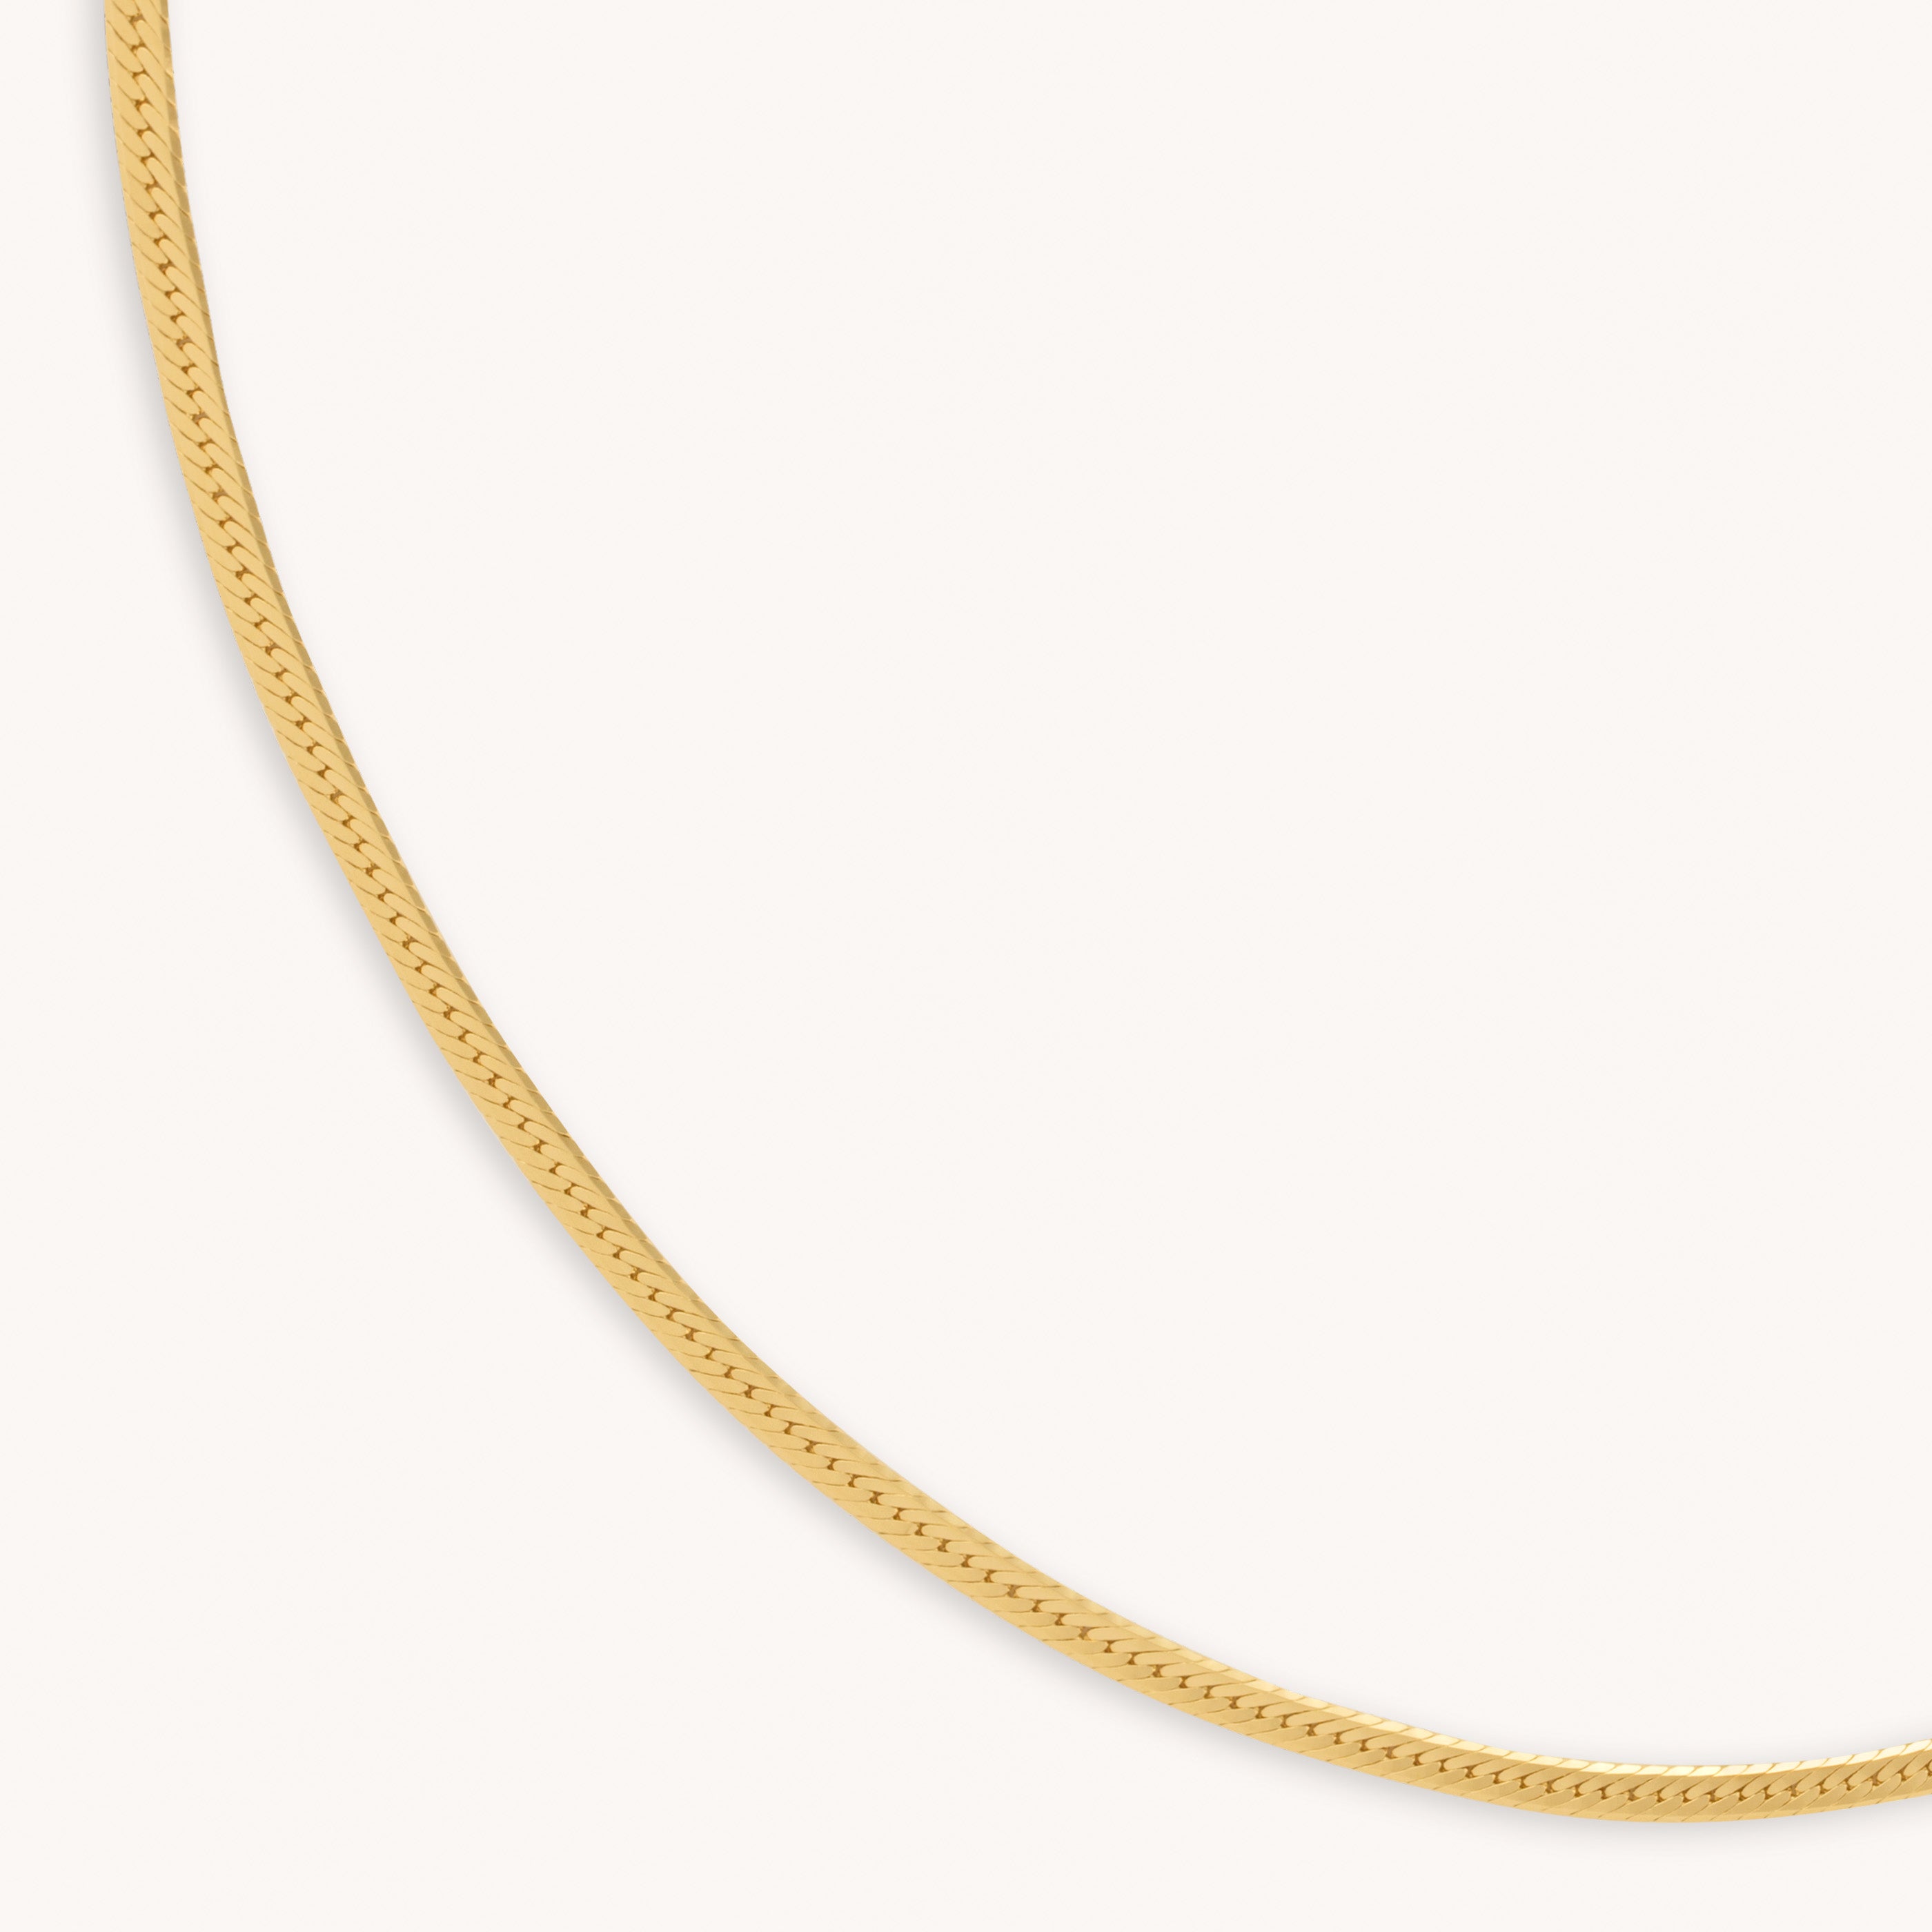 ASOS DESIGN 14k gold plated necklace in snake chain | ASOS